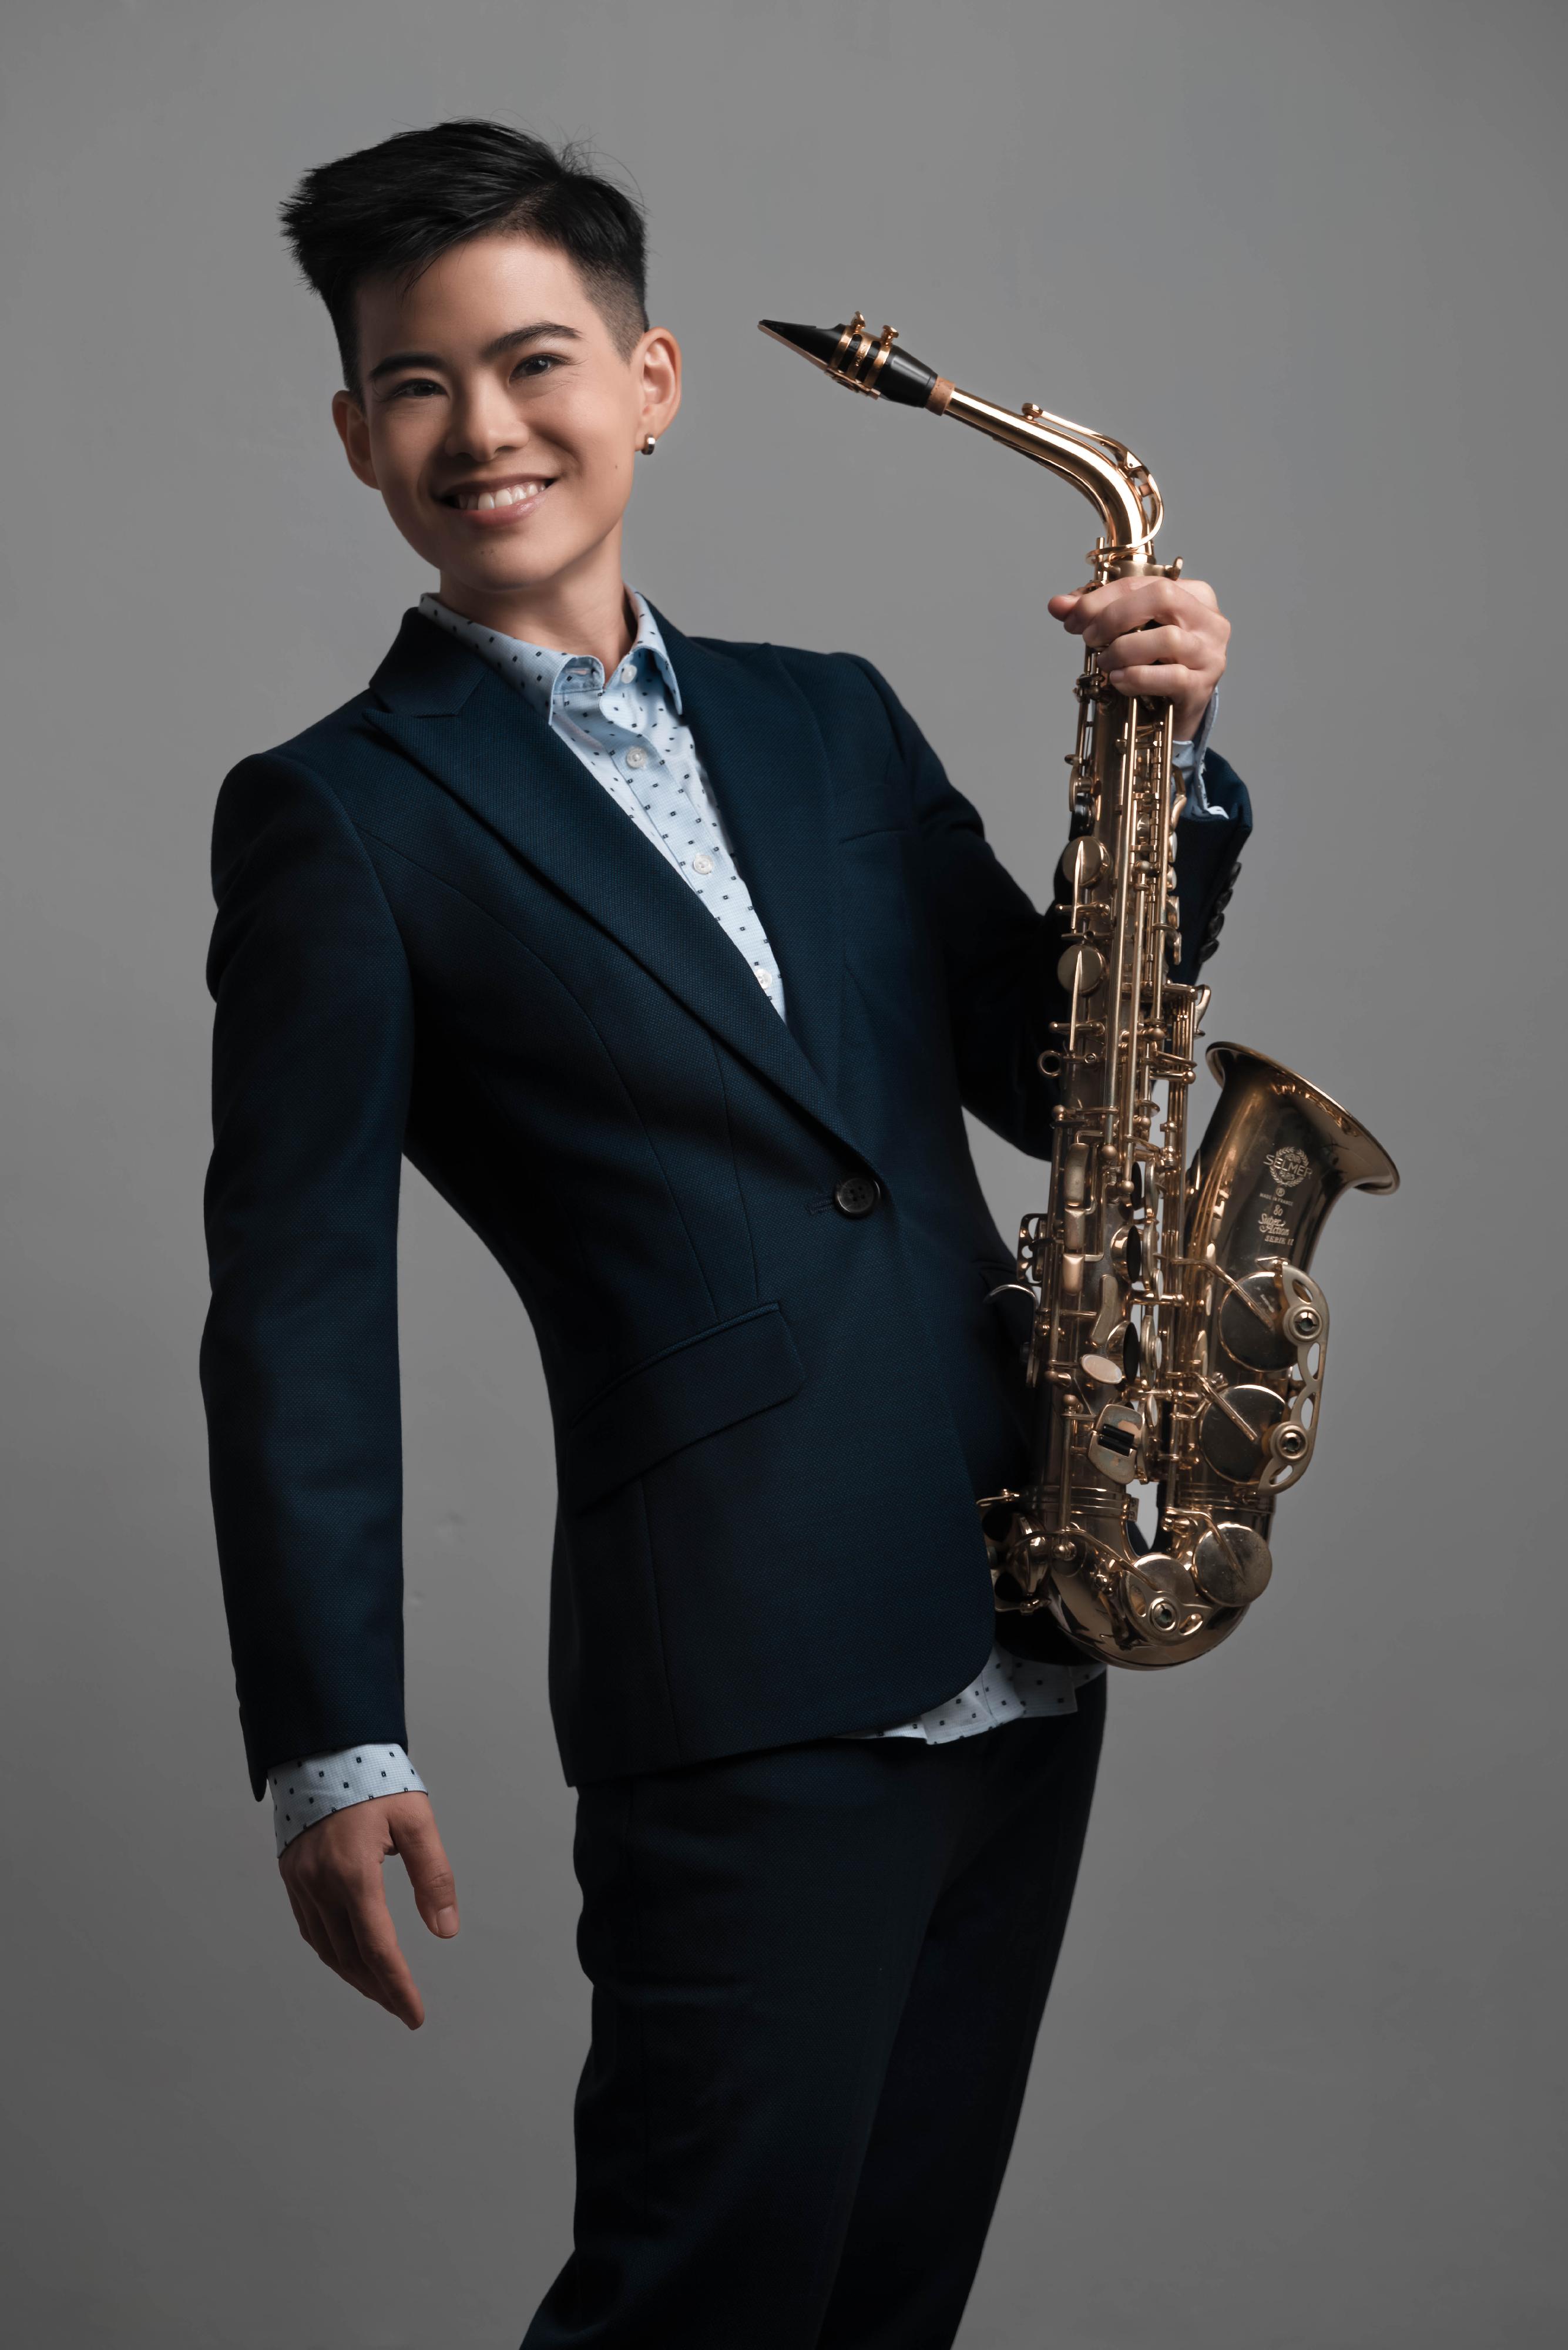 The Leisure and Cultural Services Department will present a number of recitals under the "Our Music Talents" Series and the "City Hall Virtuosi" Series from late September to January next year. Photo shows saxophonist Chemie Ching.